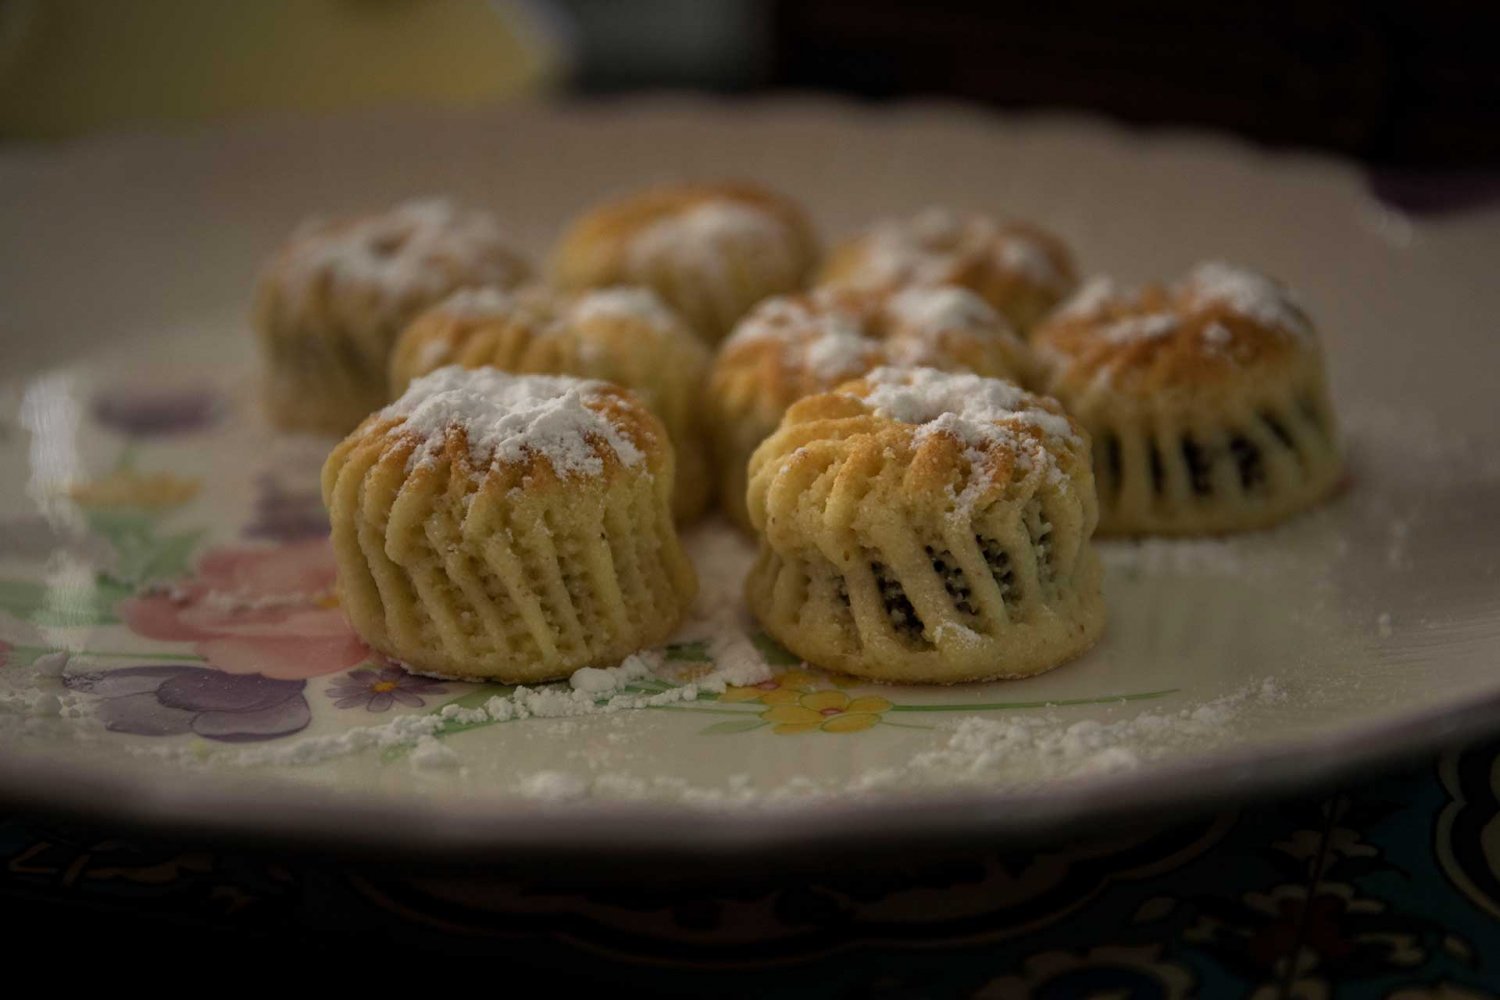 Ma'moul Middle Eastern pastries are stuffed with dates and dusted with powdered sugar